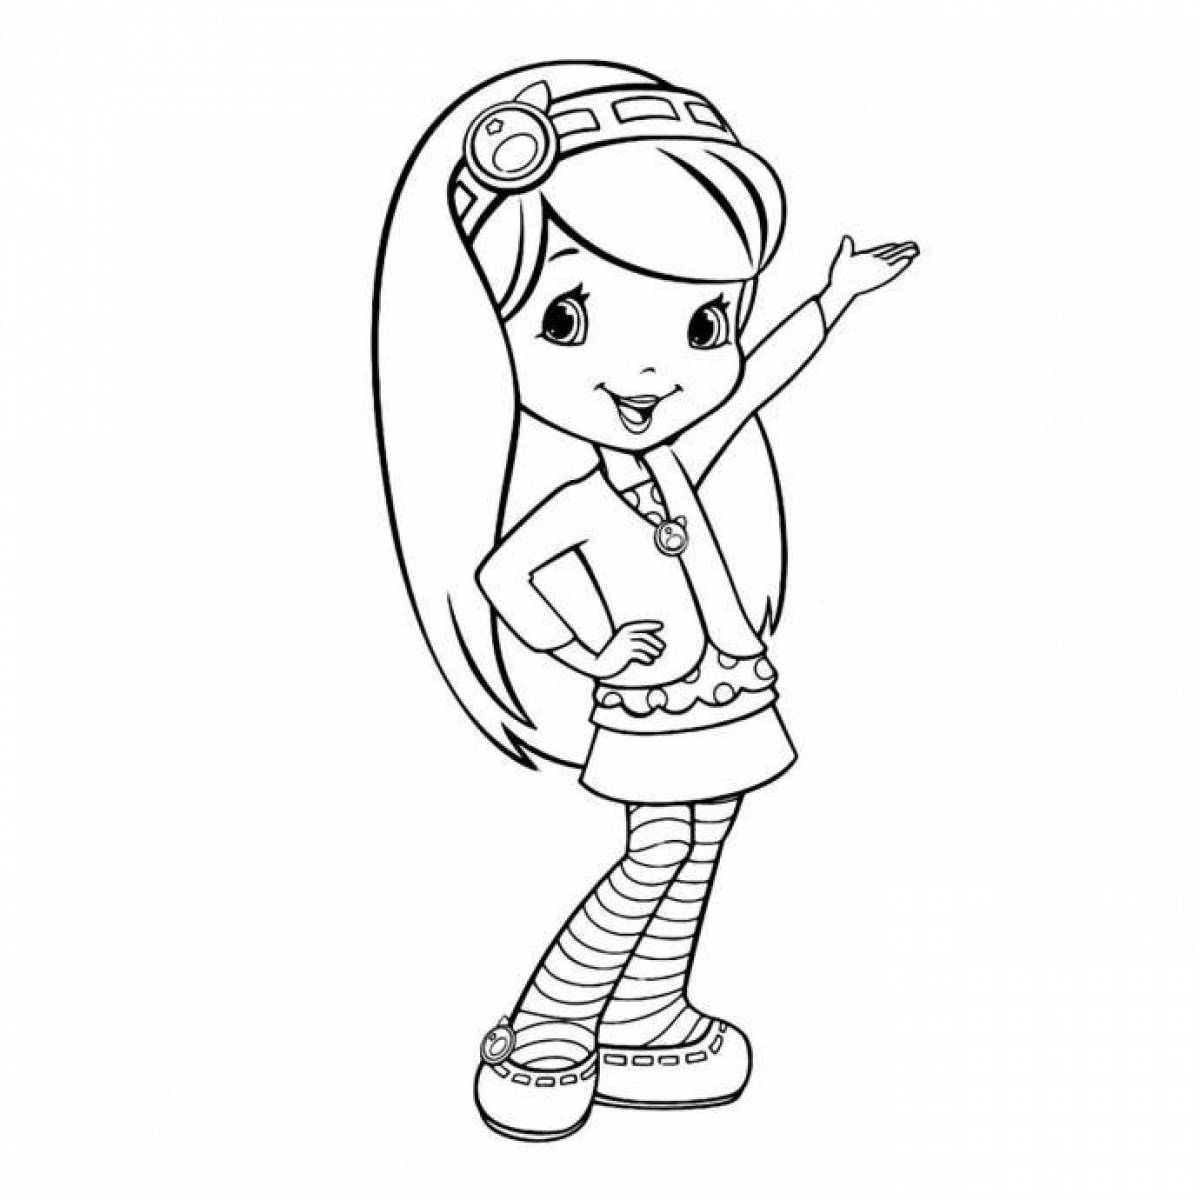 Fun coloring page turn on for children